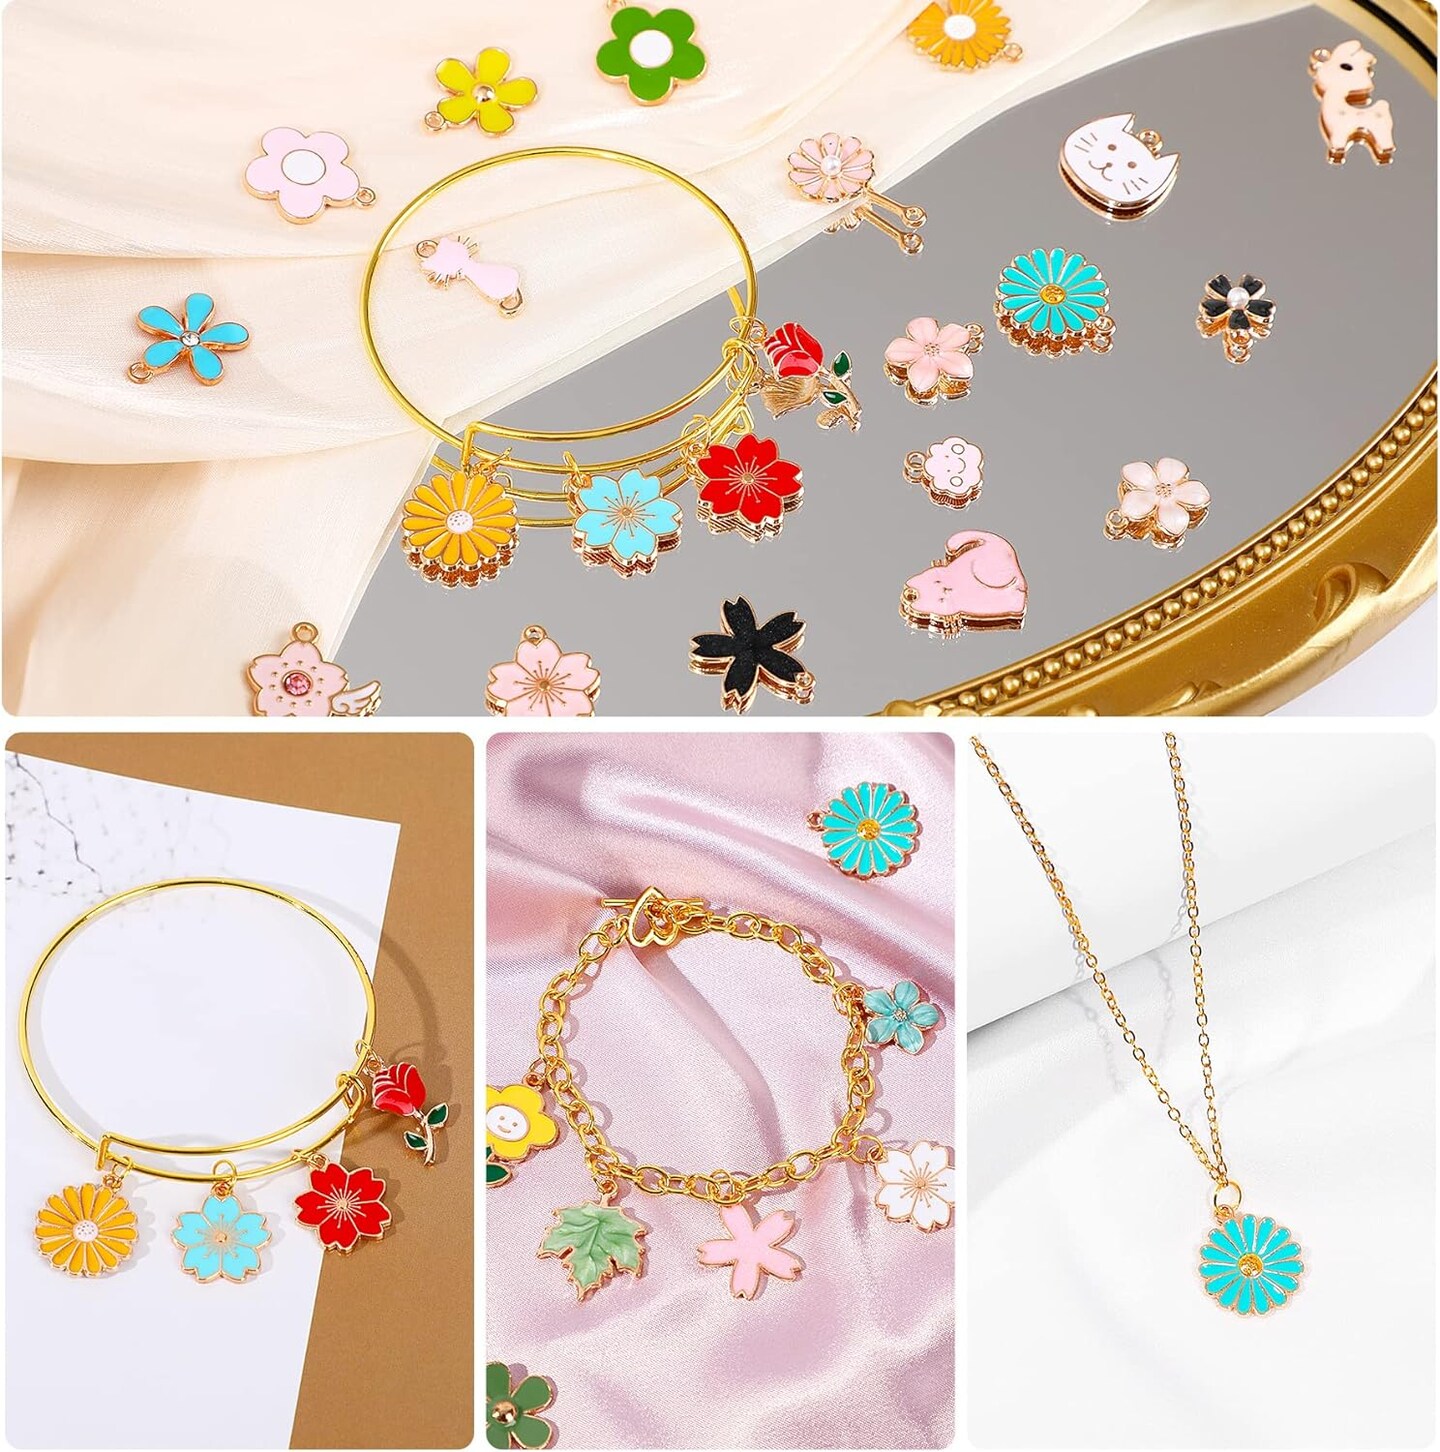 120 Pcs Spring Summer Mothers Day Floral Themed Flower Charms for Jewelry Making, Assorted Gold Enamel Charm Pendants for DIY Necklace Bracelet Earrings Supplies Gifts for Mom Women Girls